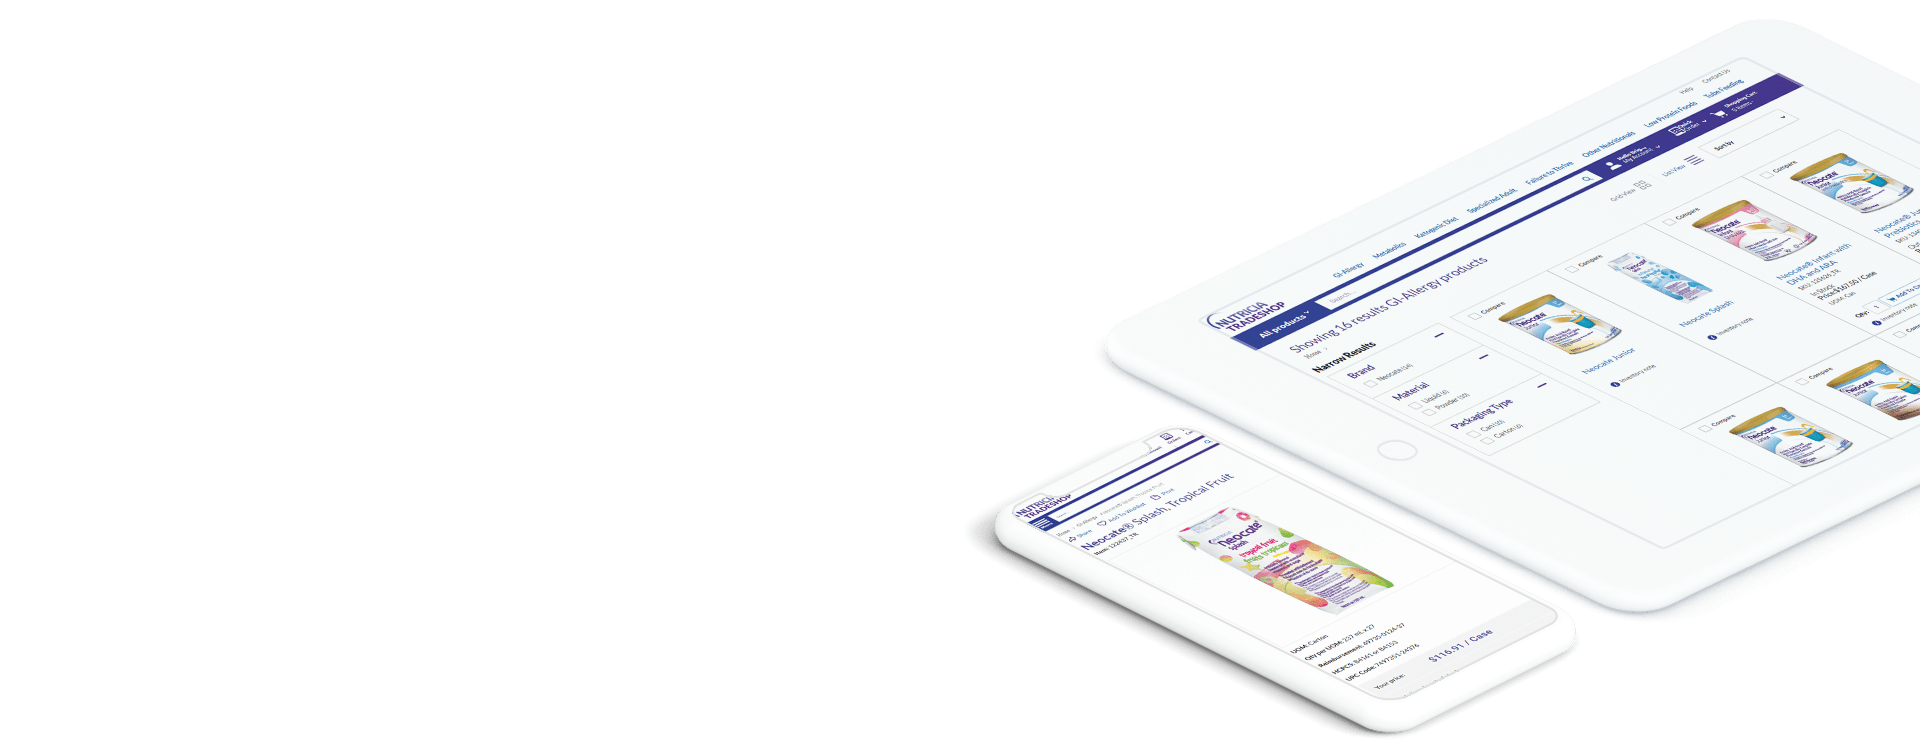 Nutricia Tradeshop ecommerce case study device imagery